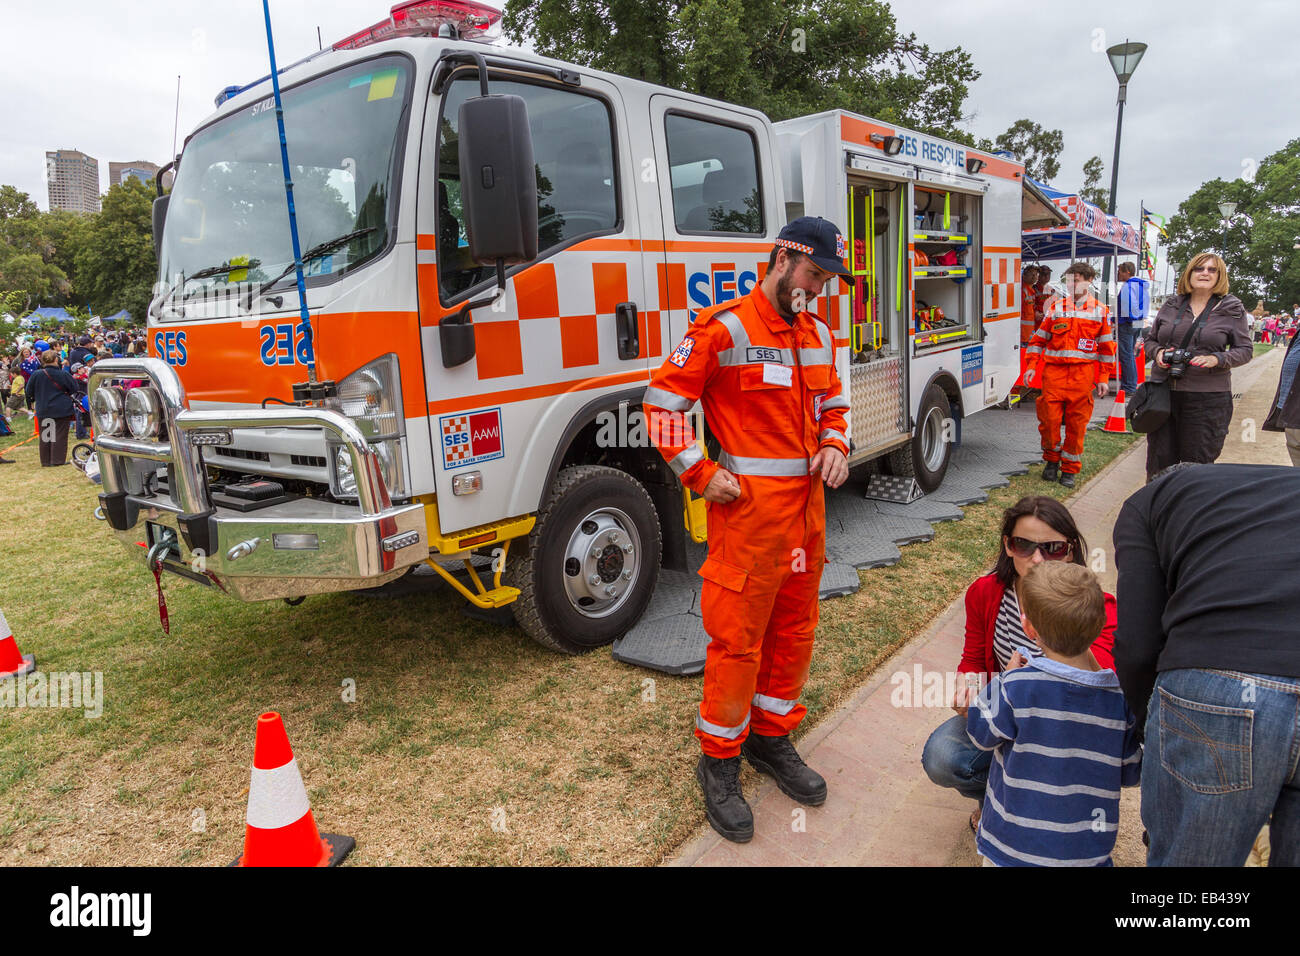 State Emergency Service, SES, vehicle on display in Melbourne, Australia Stock Photo